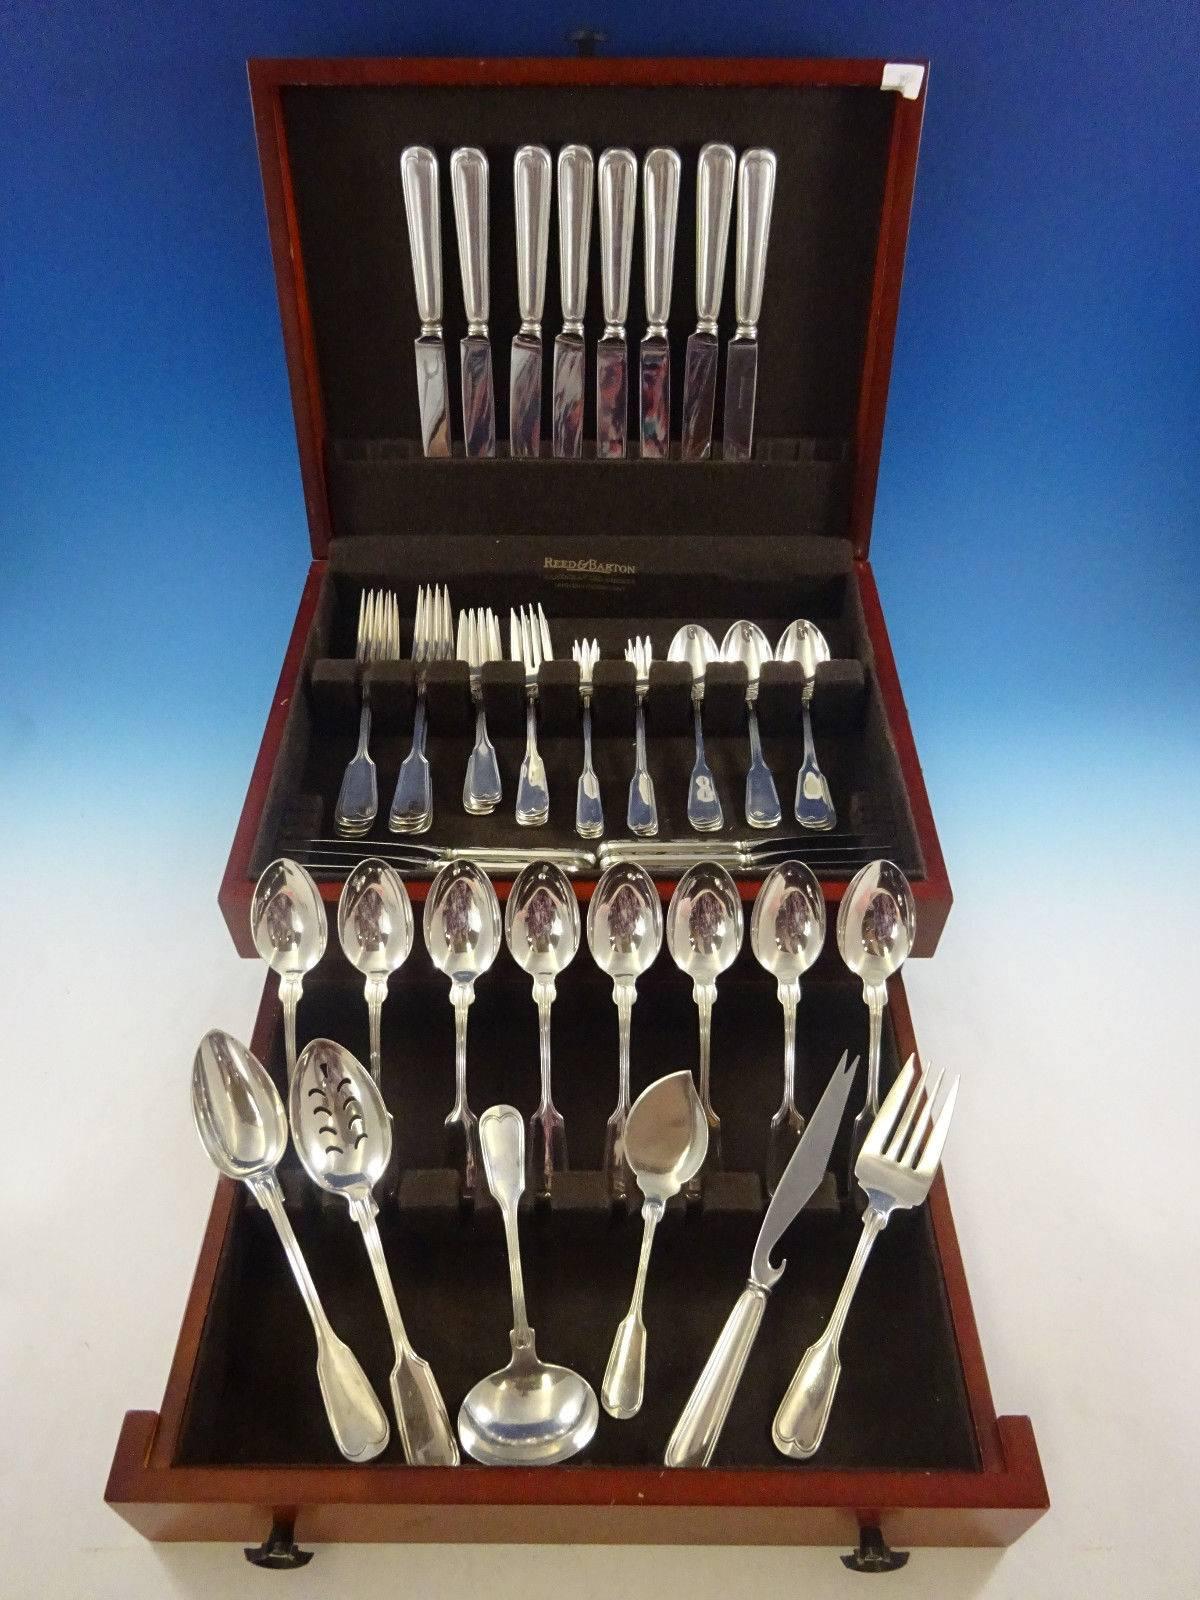 Exceptional Fiddle Thread by Frank Smith sterling silver dinner size flatware set of 62 pieces. This set includes:

 
Eight dinner knives, 9 3/8